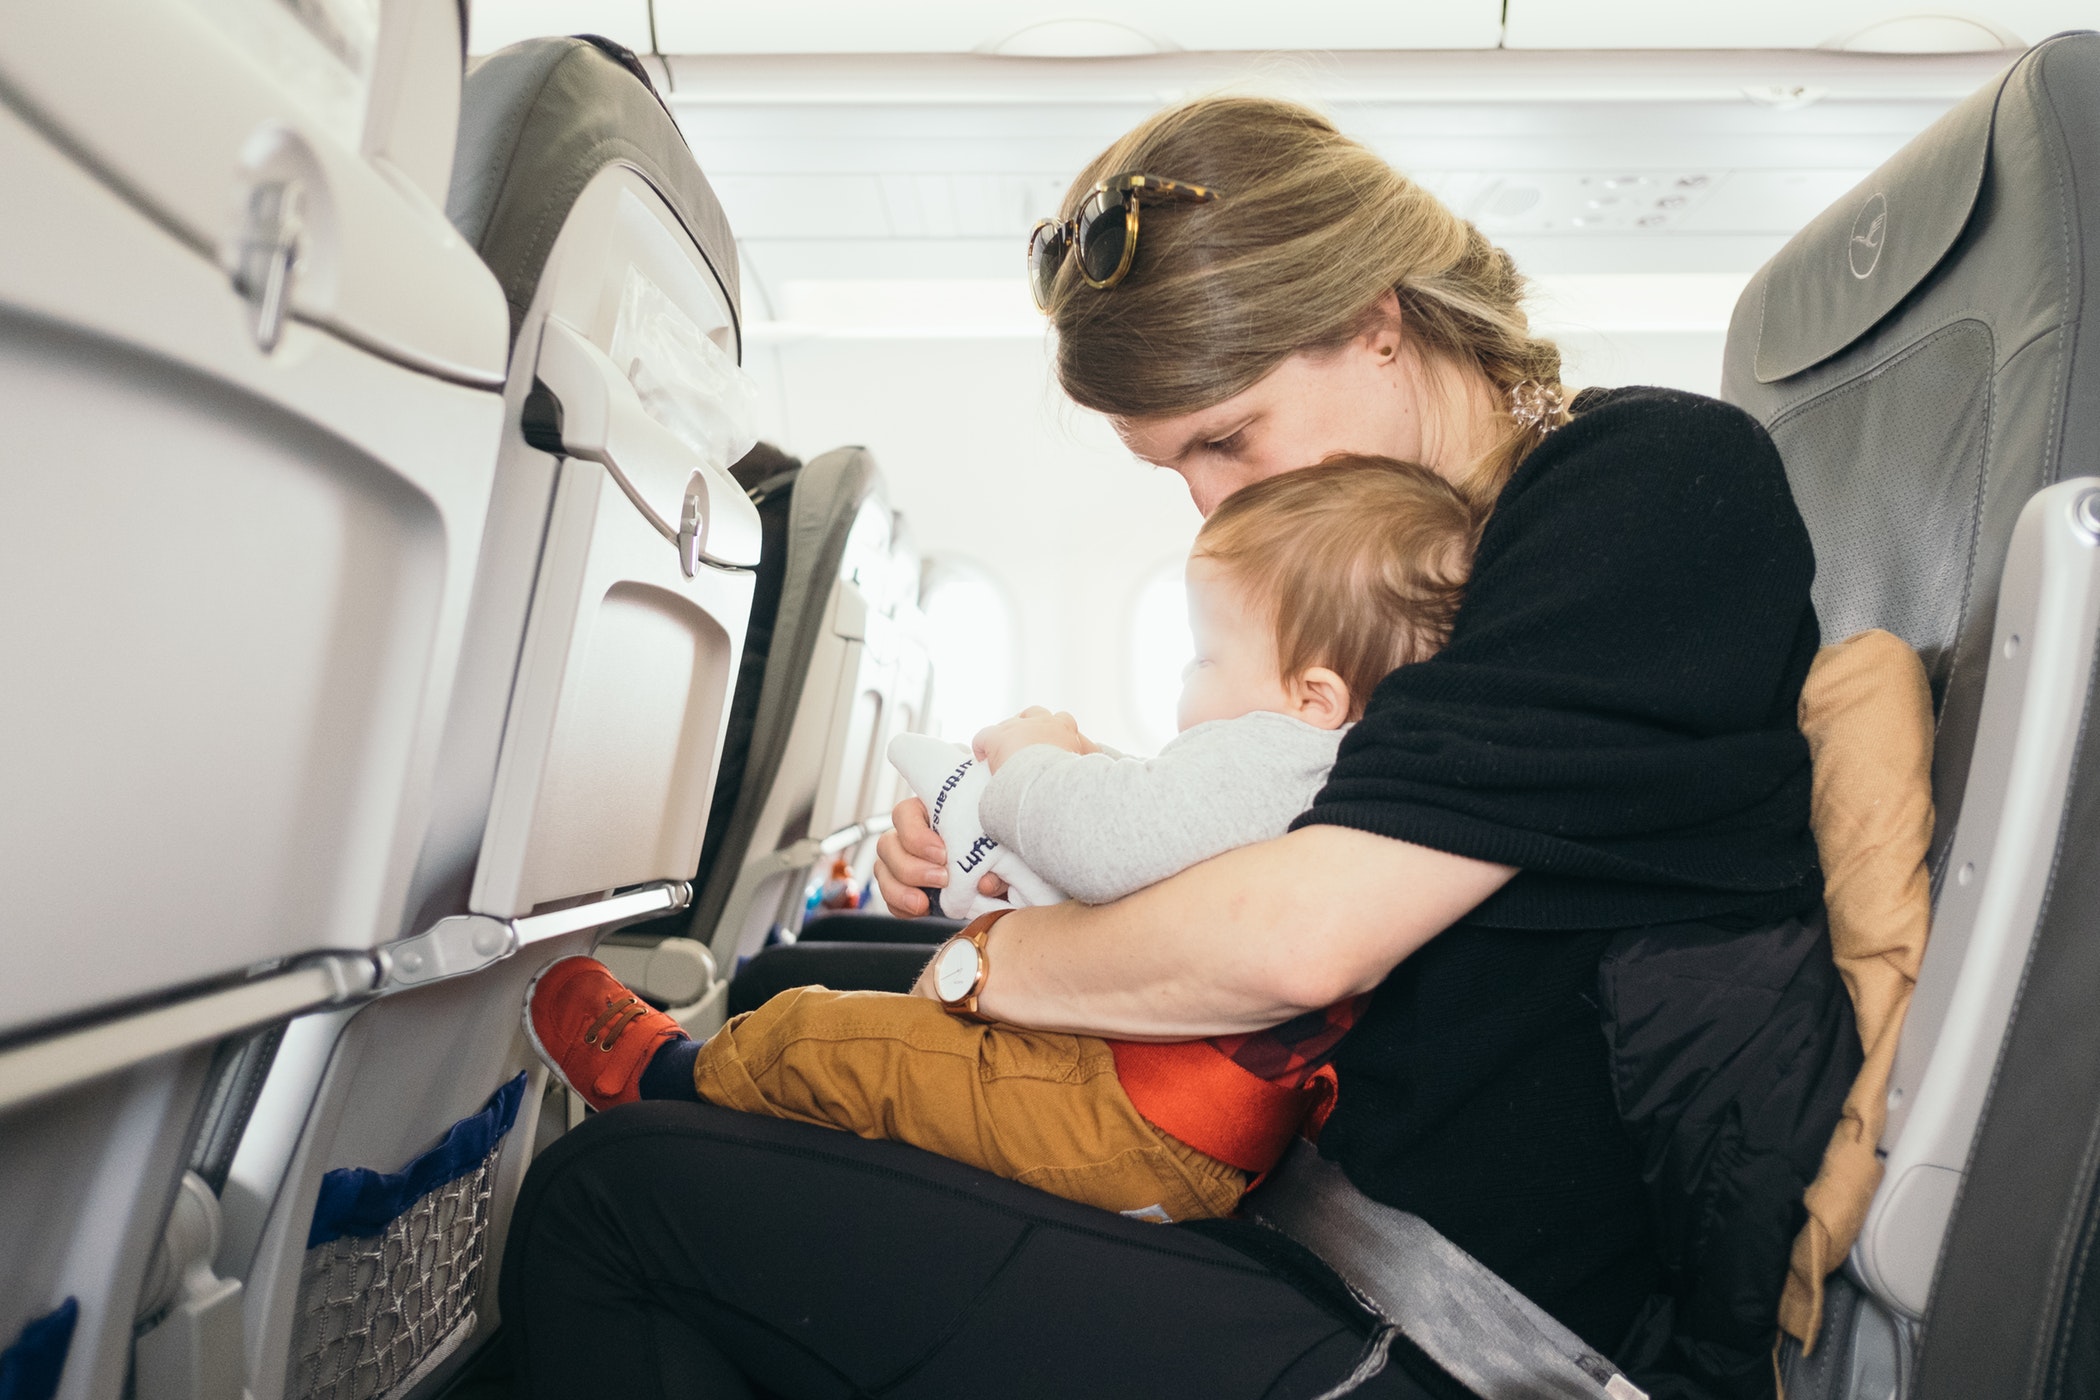 Mother holding her child on a plane